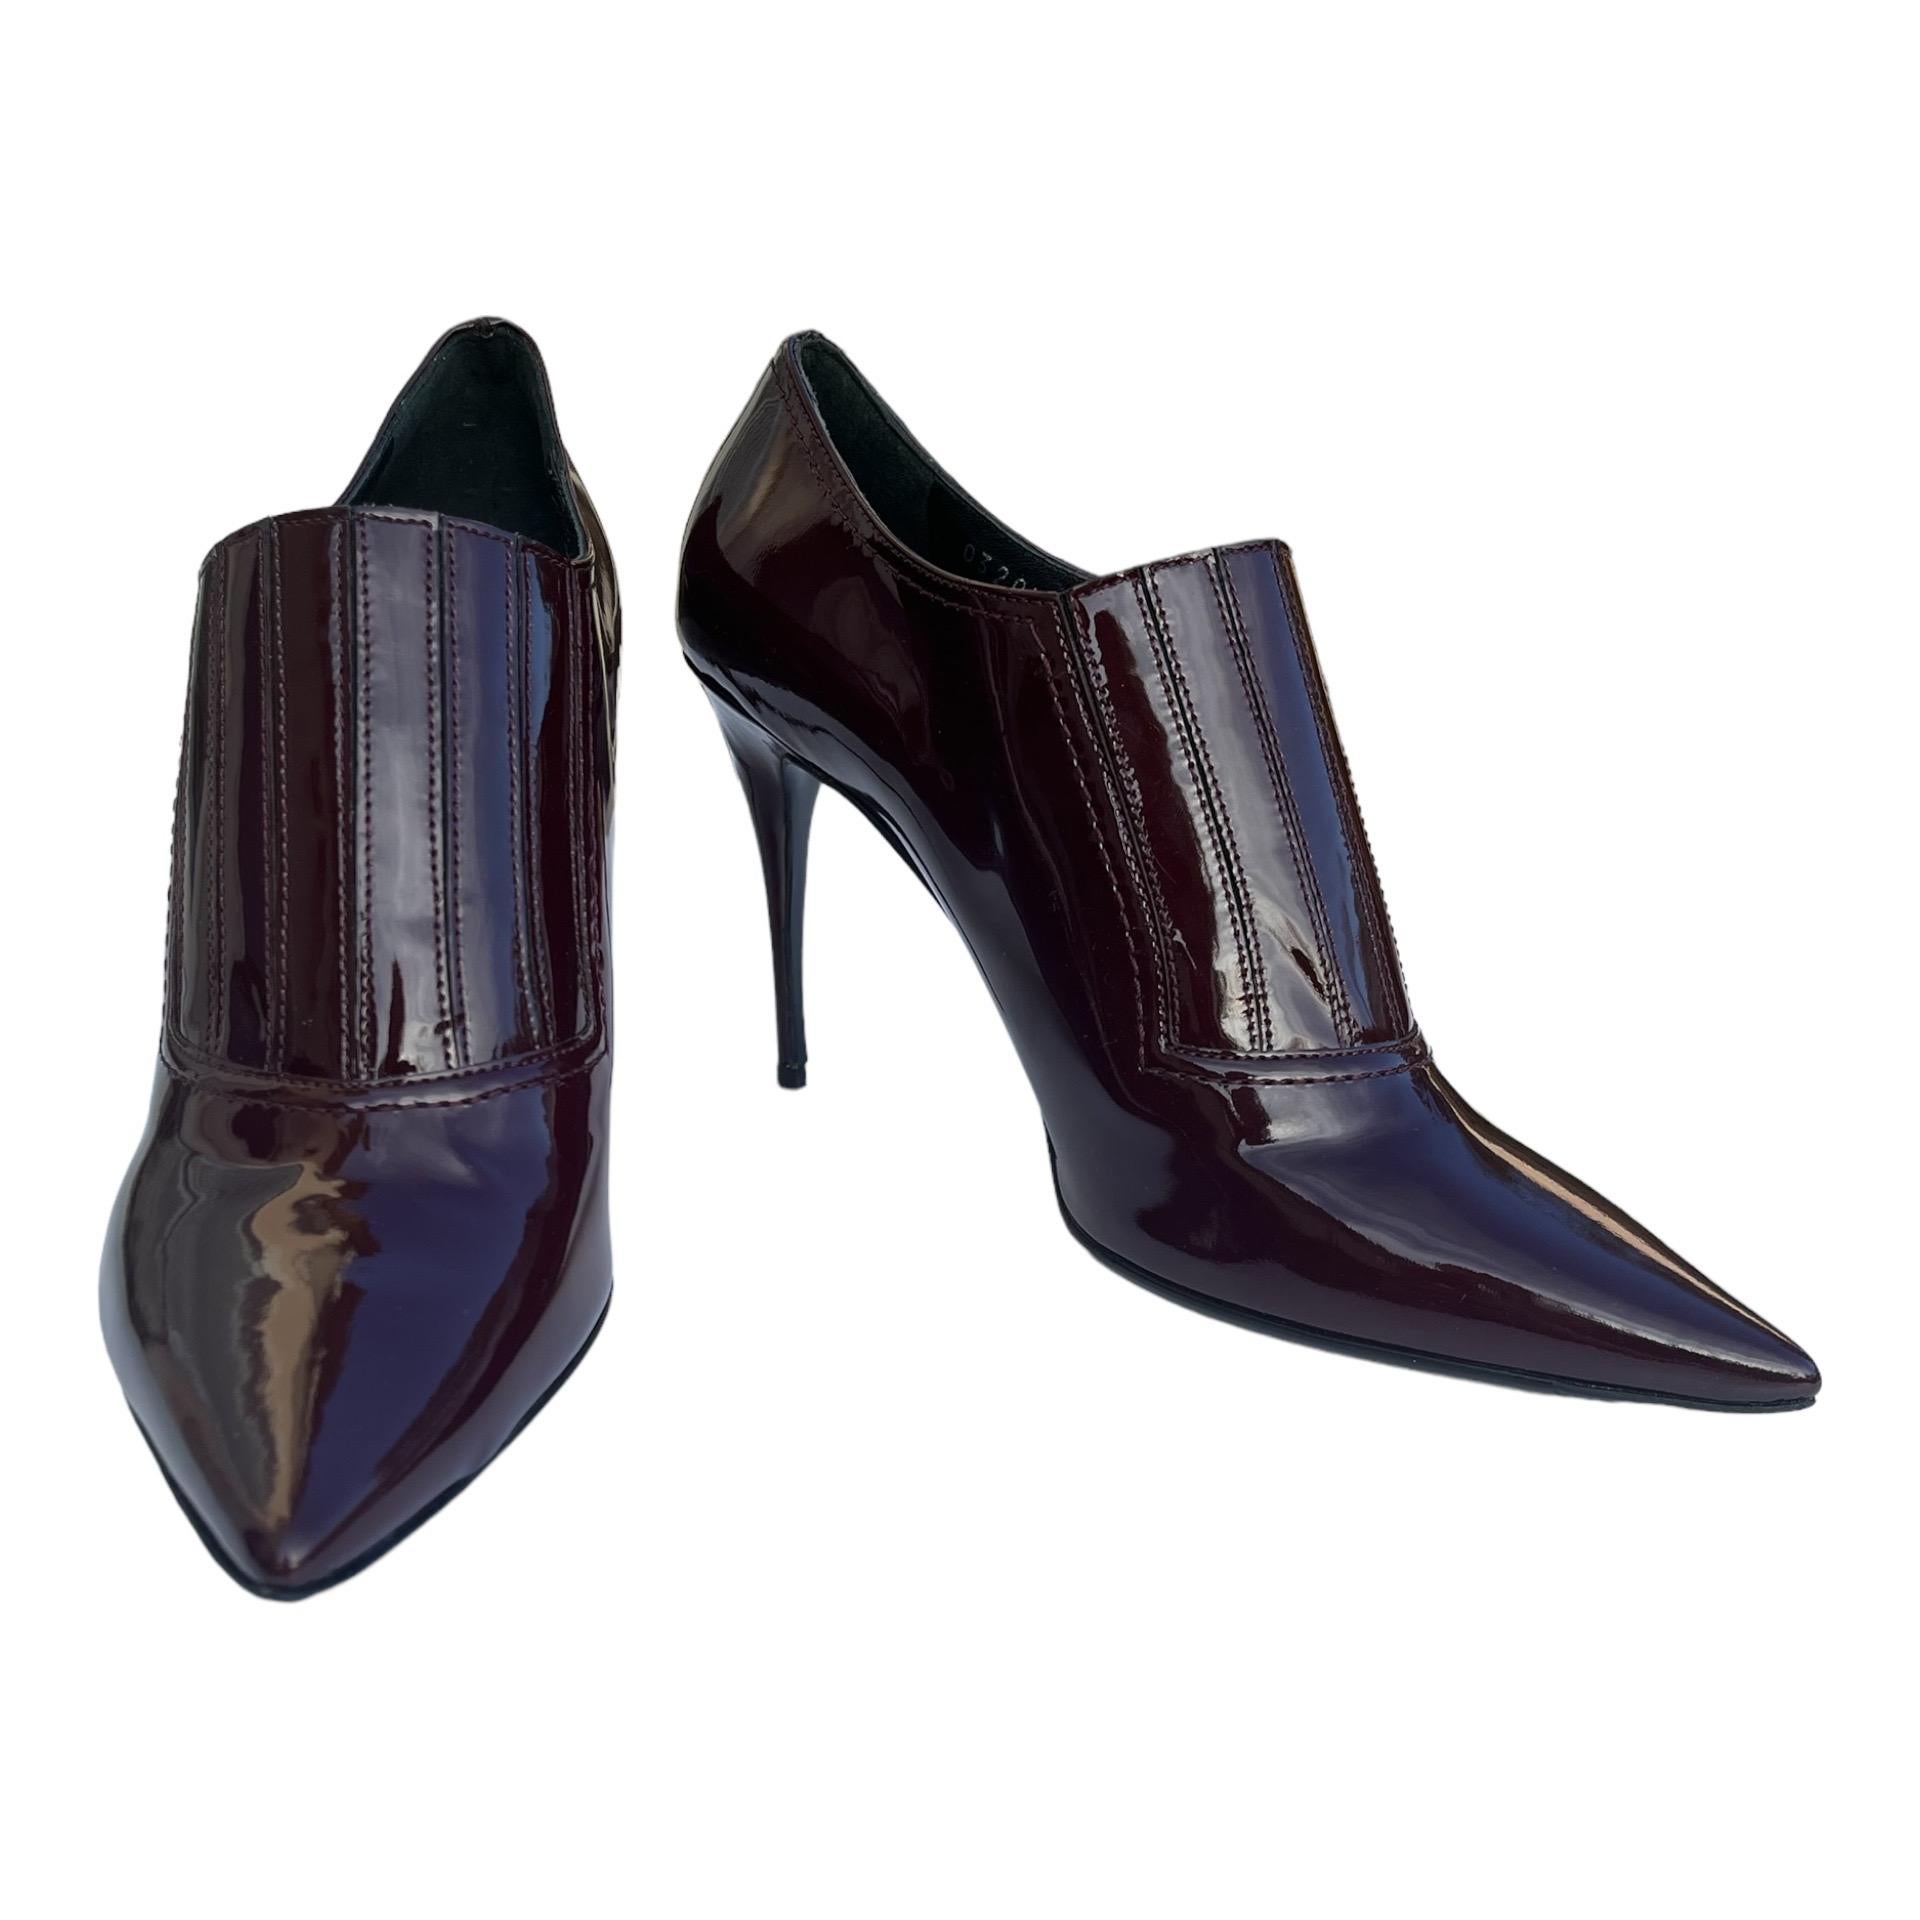 Valentino Garavani Burgundy Patent Leather Shoes
Size: Italian 39 - US 9
Elegant bootie with a heel that measures 4 inches
Smooth leather lining, Elasticized front detail, Leather sole.
Made in Italy.
New, in original box.